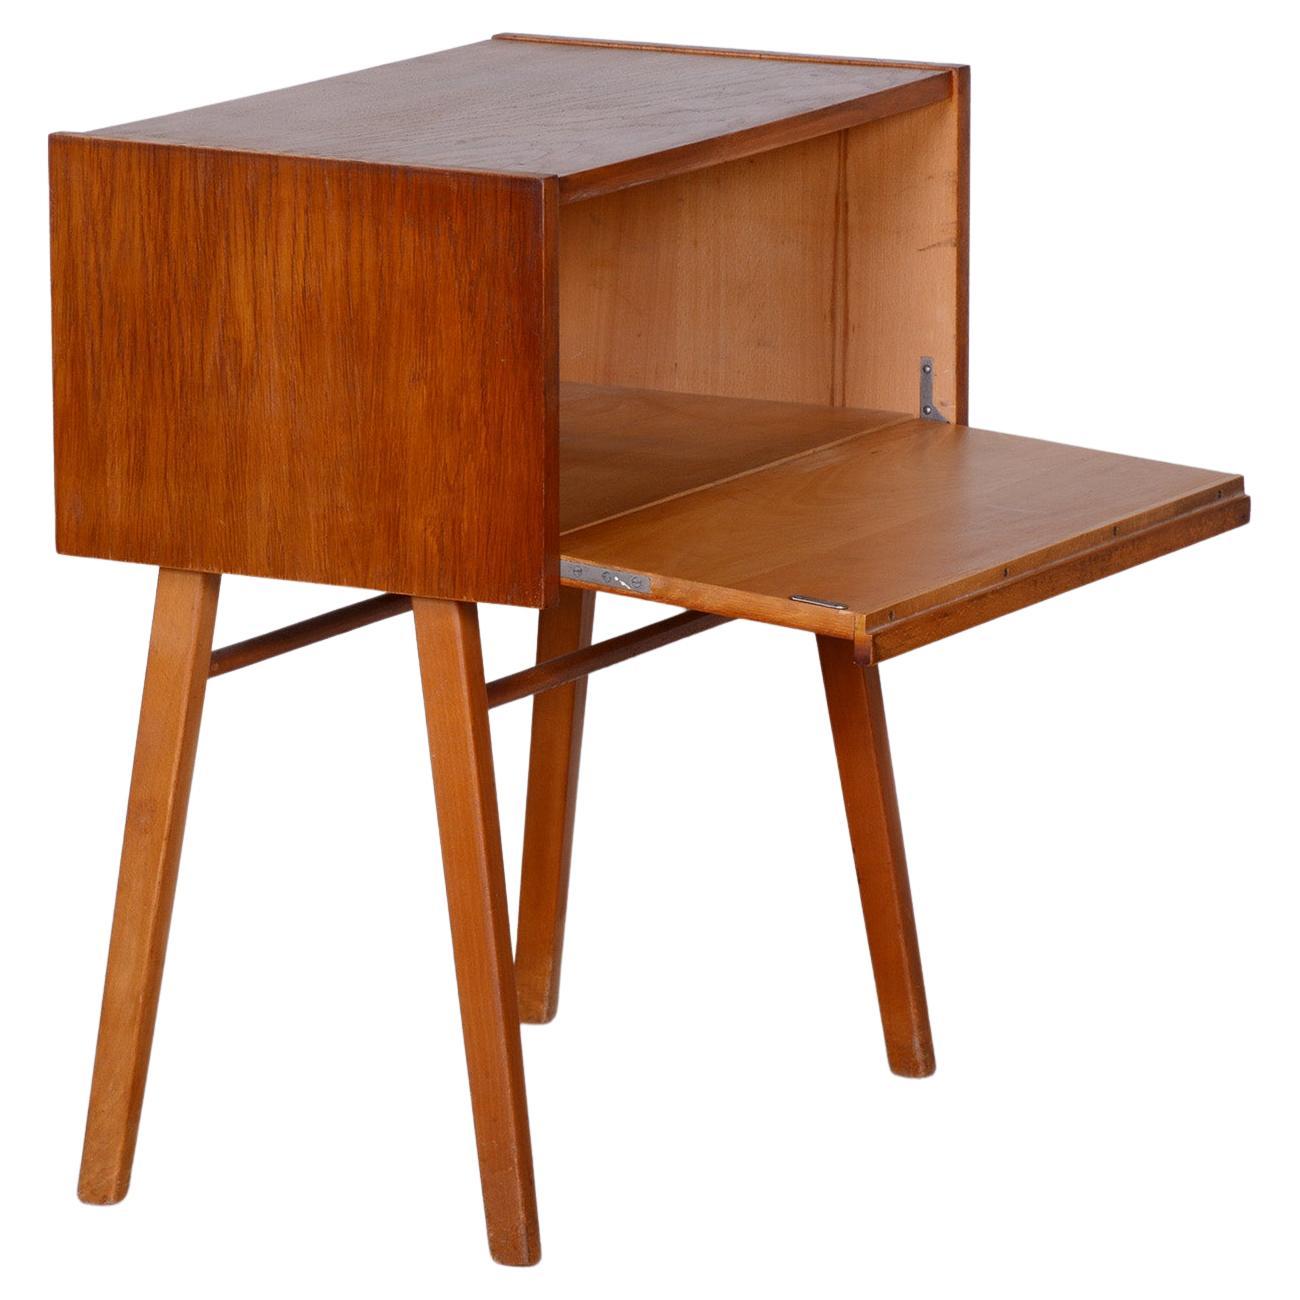 Czech Mid-Century Side Table, Cabinet Made Out of Oak, 1950s, Refreshed Polish For Sale